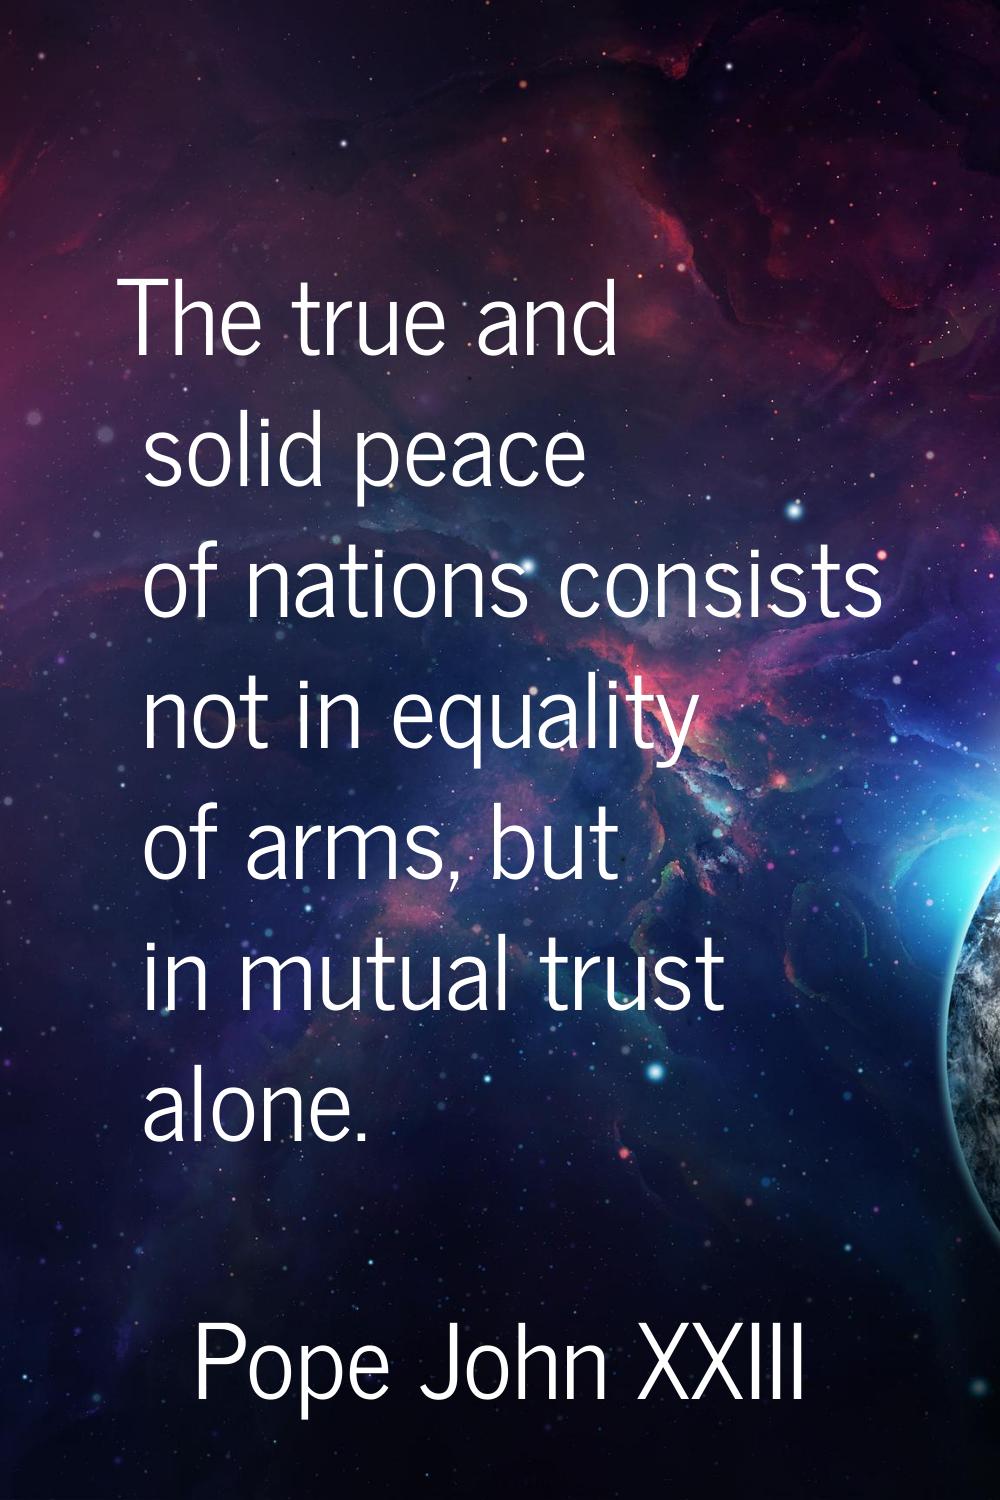 The true and solid peace of nations consists not in equality of arms, but in mutual trust alone.